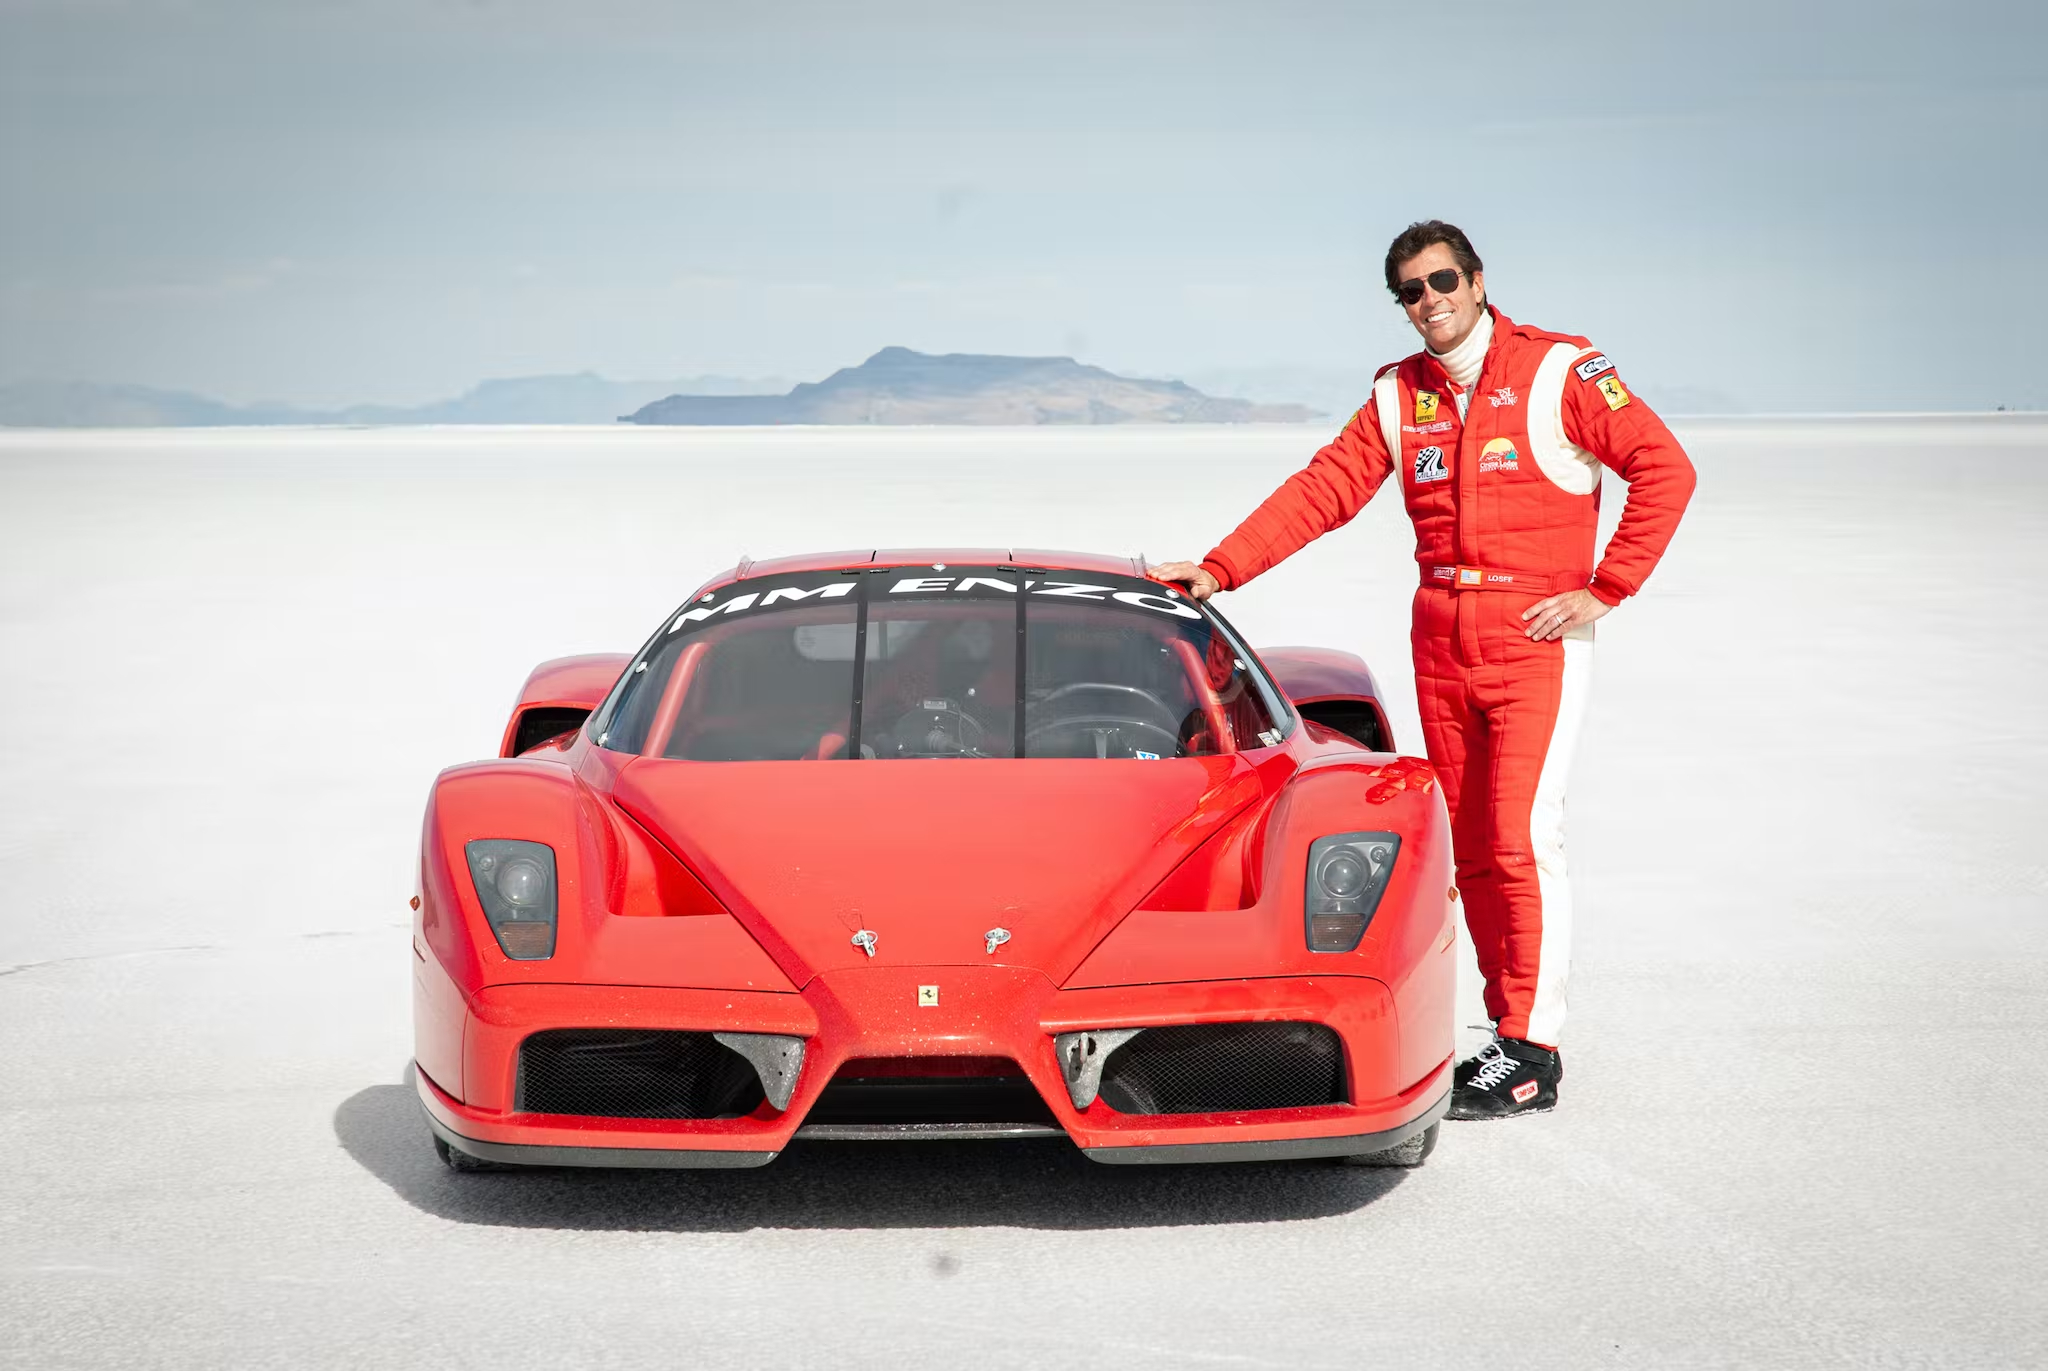 ‘I crashed my Enzo at 200mph, rebuilt it and added another 65,000 high-speed miles’